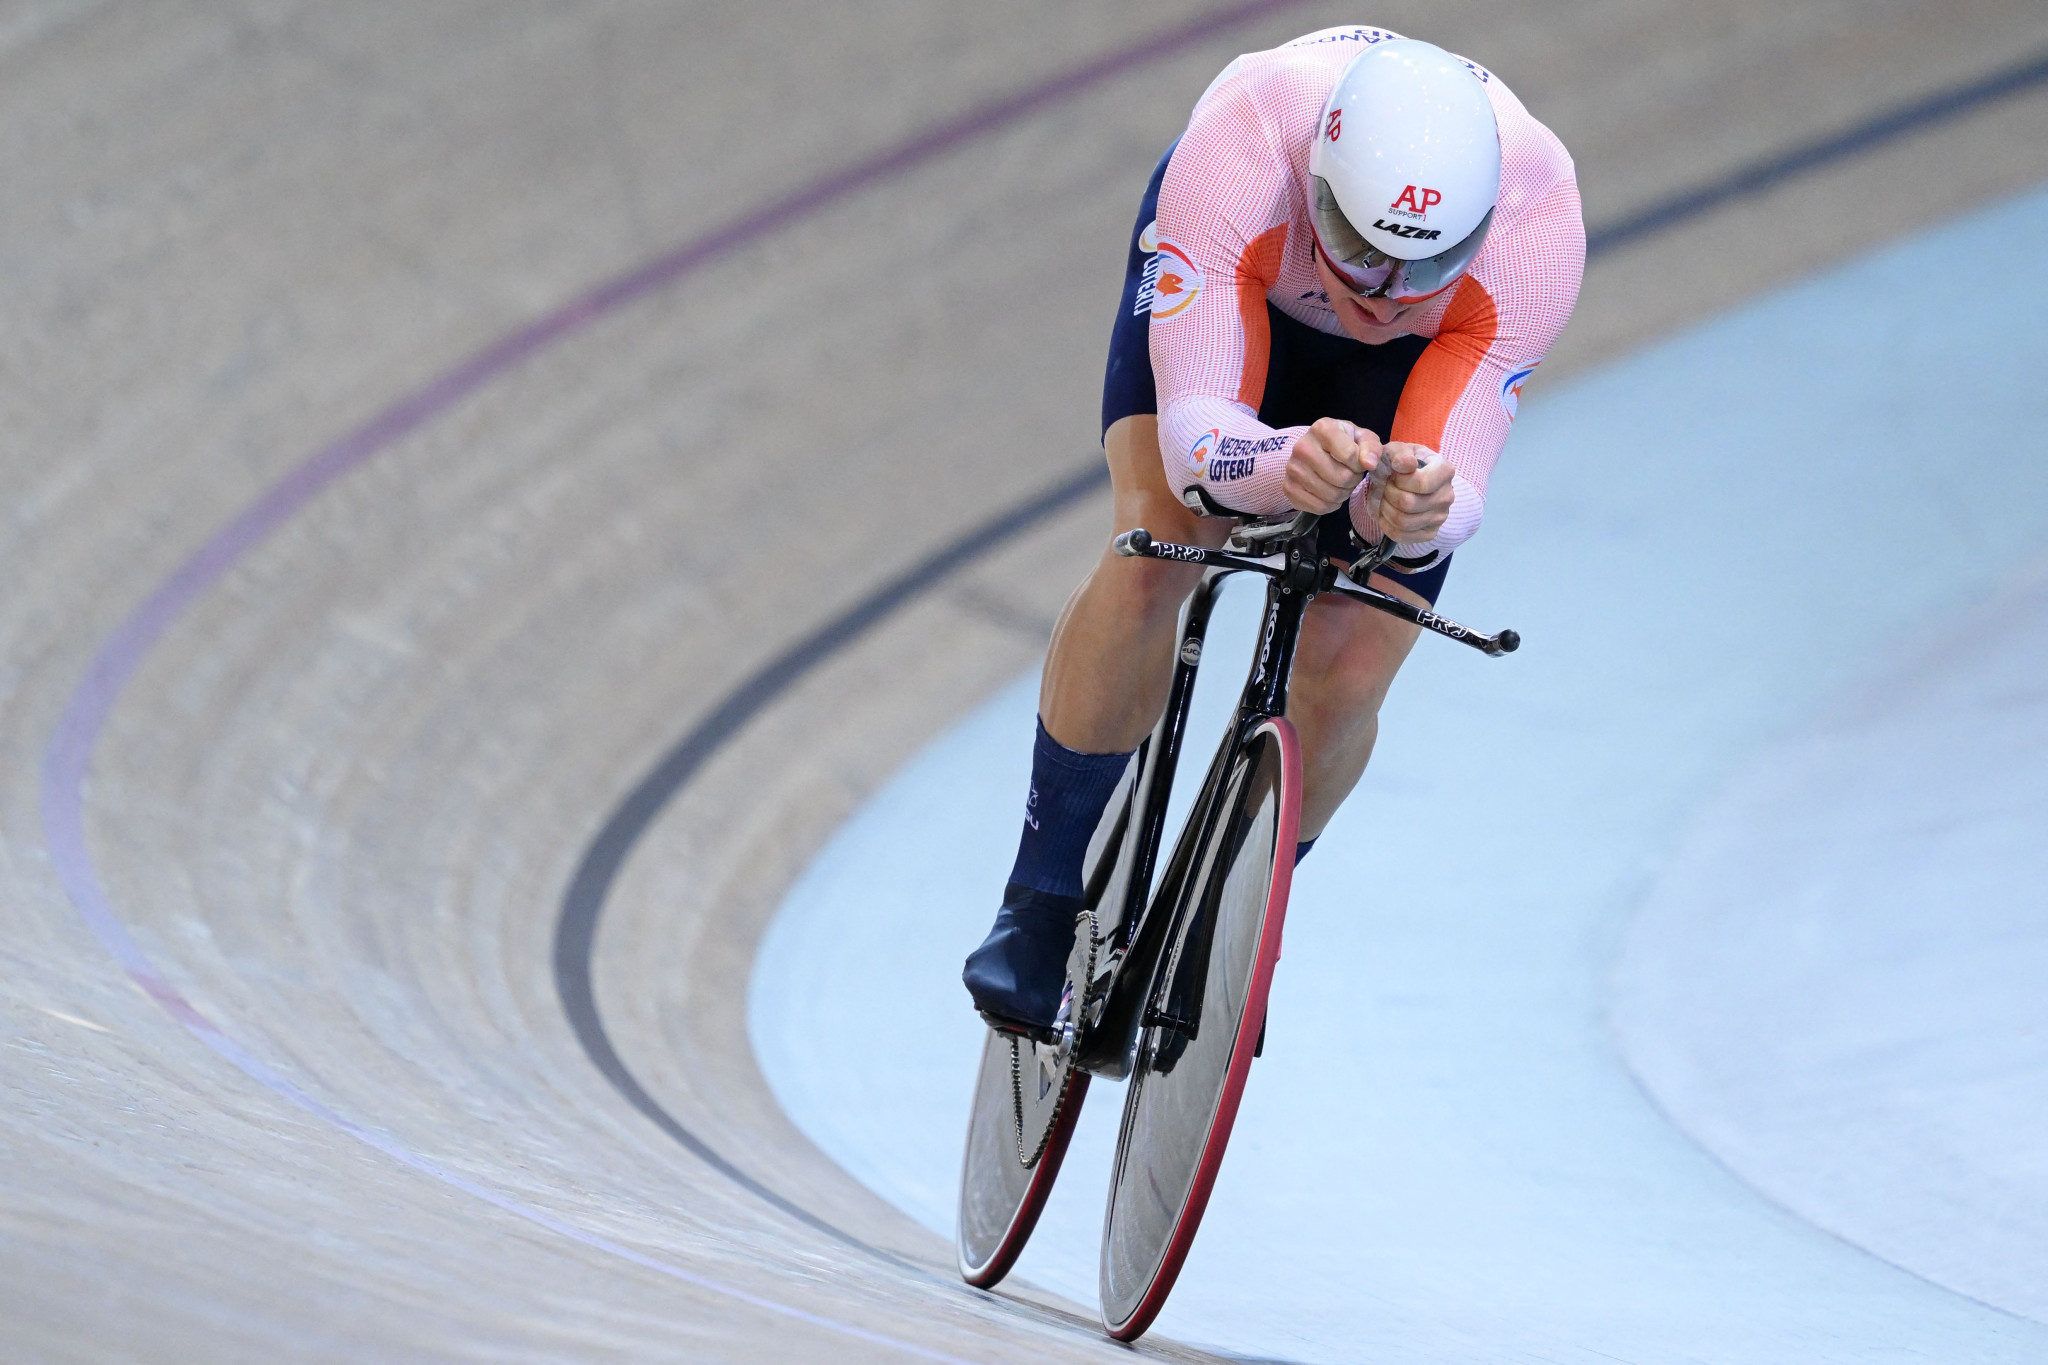 Jeffrey Hoogland of the Netherlands won the men's one kilometre time trial title at the UCI Track Cycling World Championships ©Getty Images